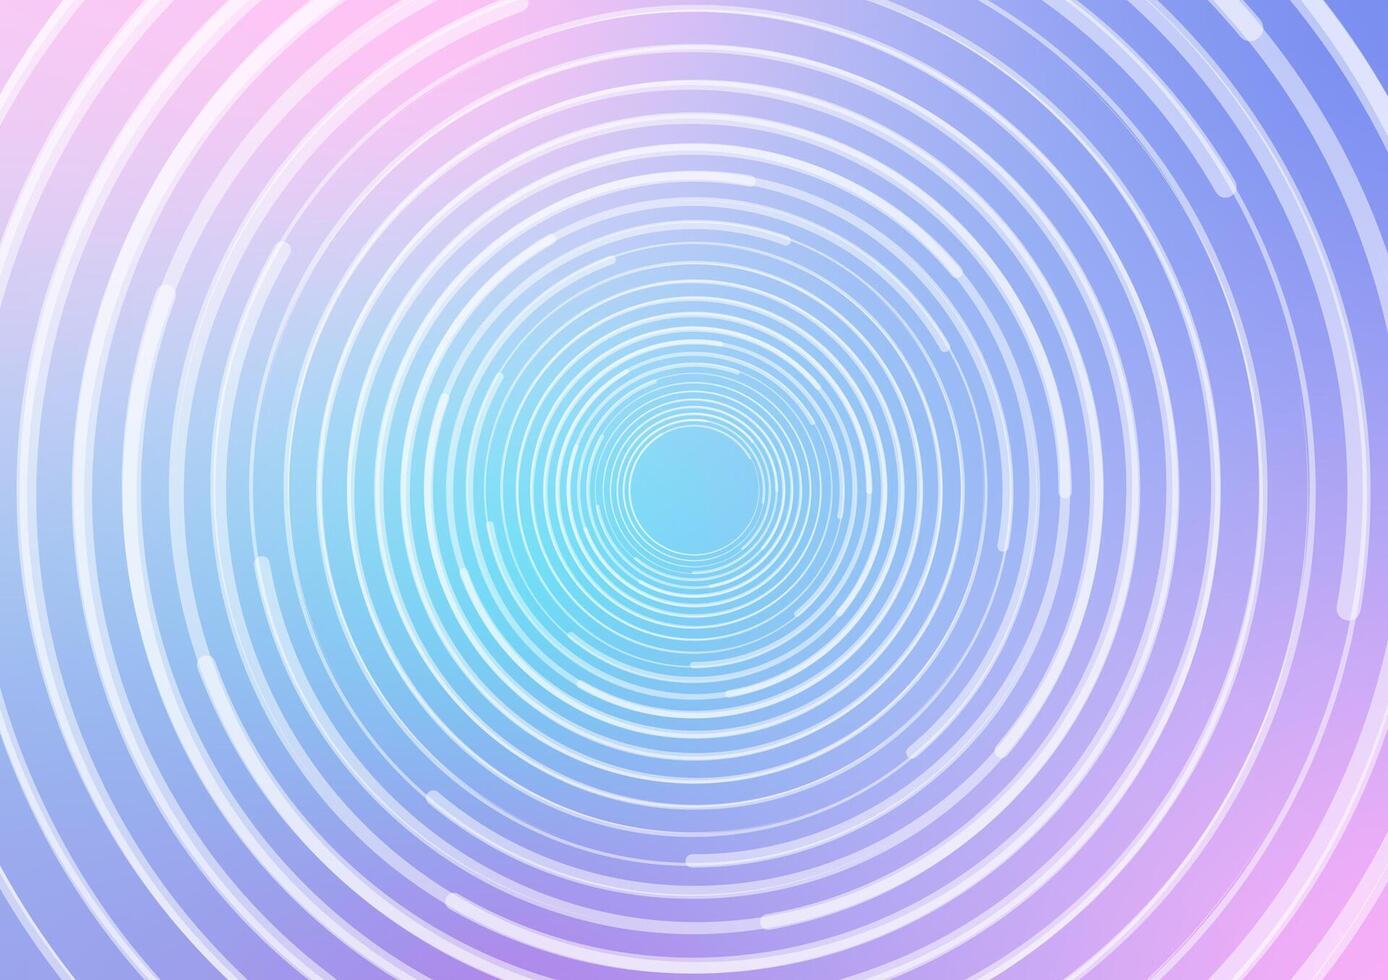 Loops circle pattern graphic blue presentation background vector